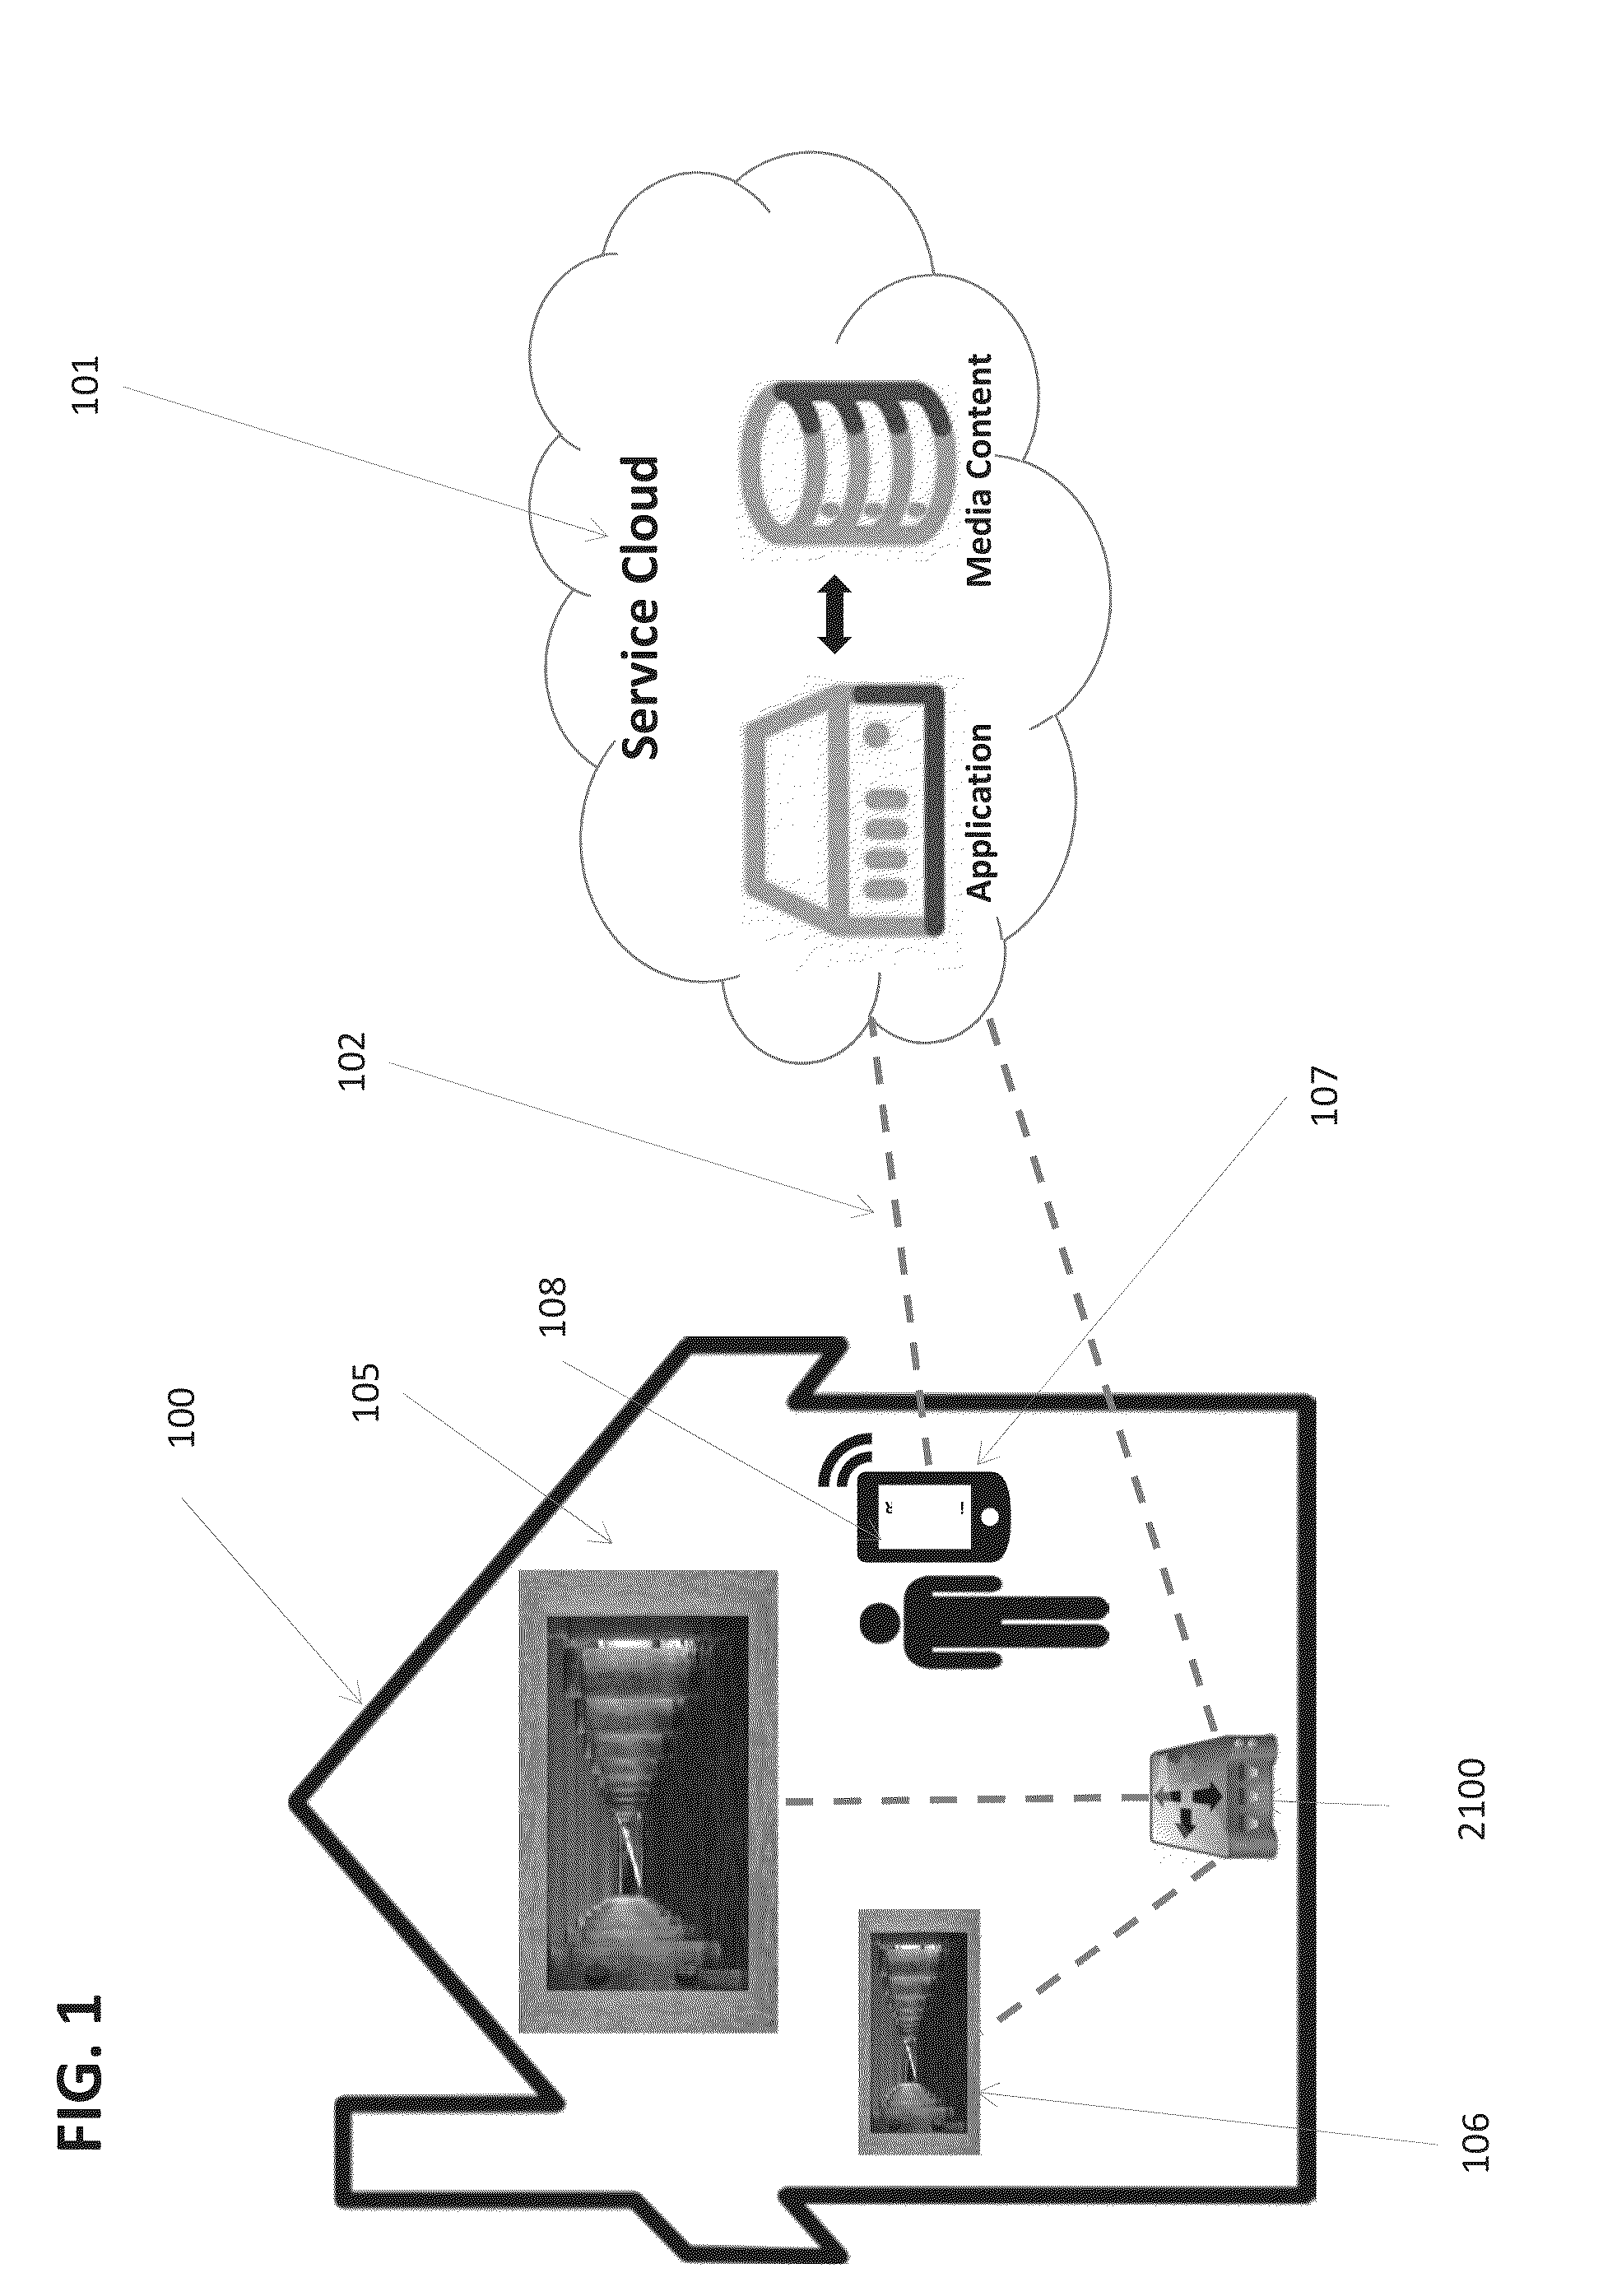 Systems and Methods for Distributing, Displaying, Viewing, and Controlling Digital Art and Imaging